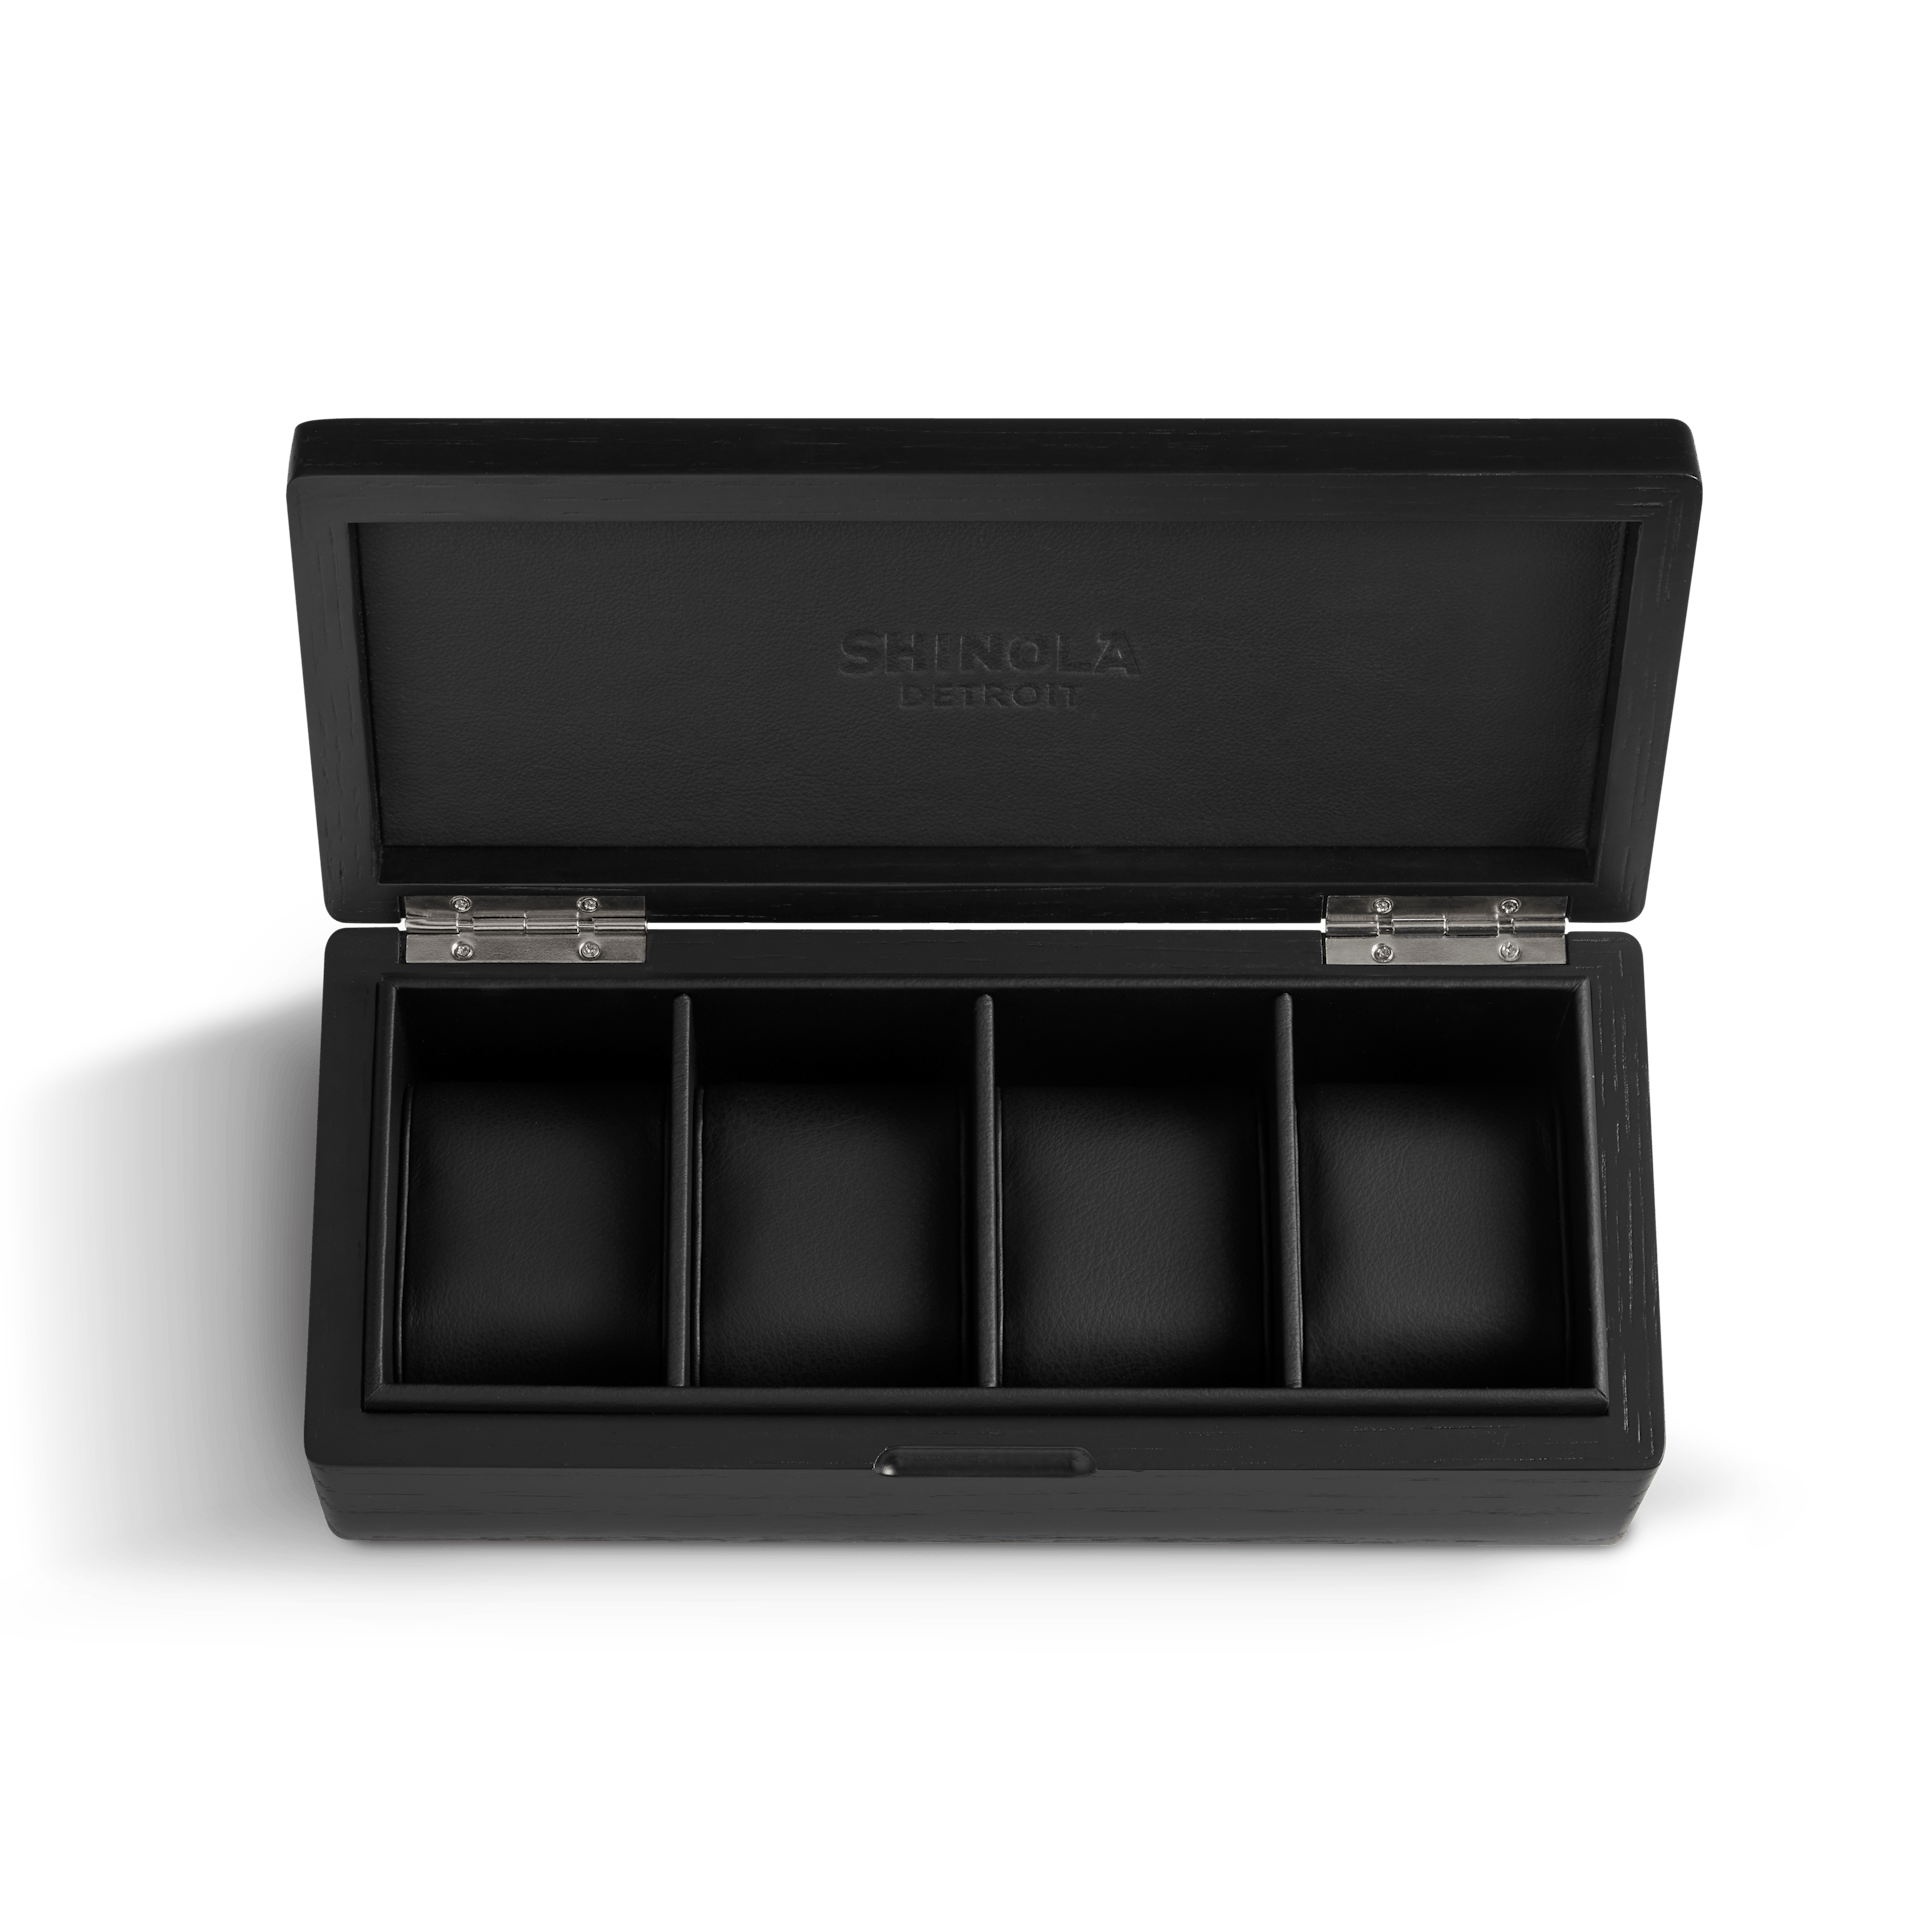 Watch Box | Online Store of Watchboxes